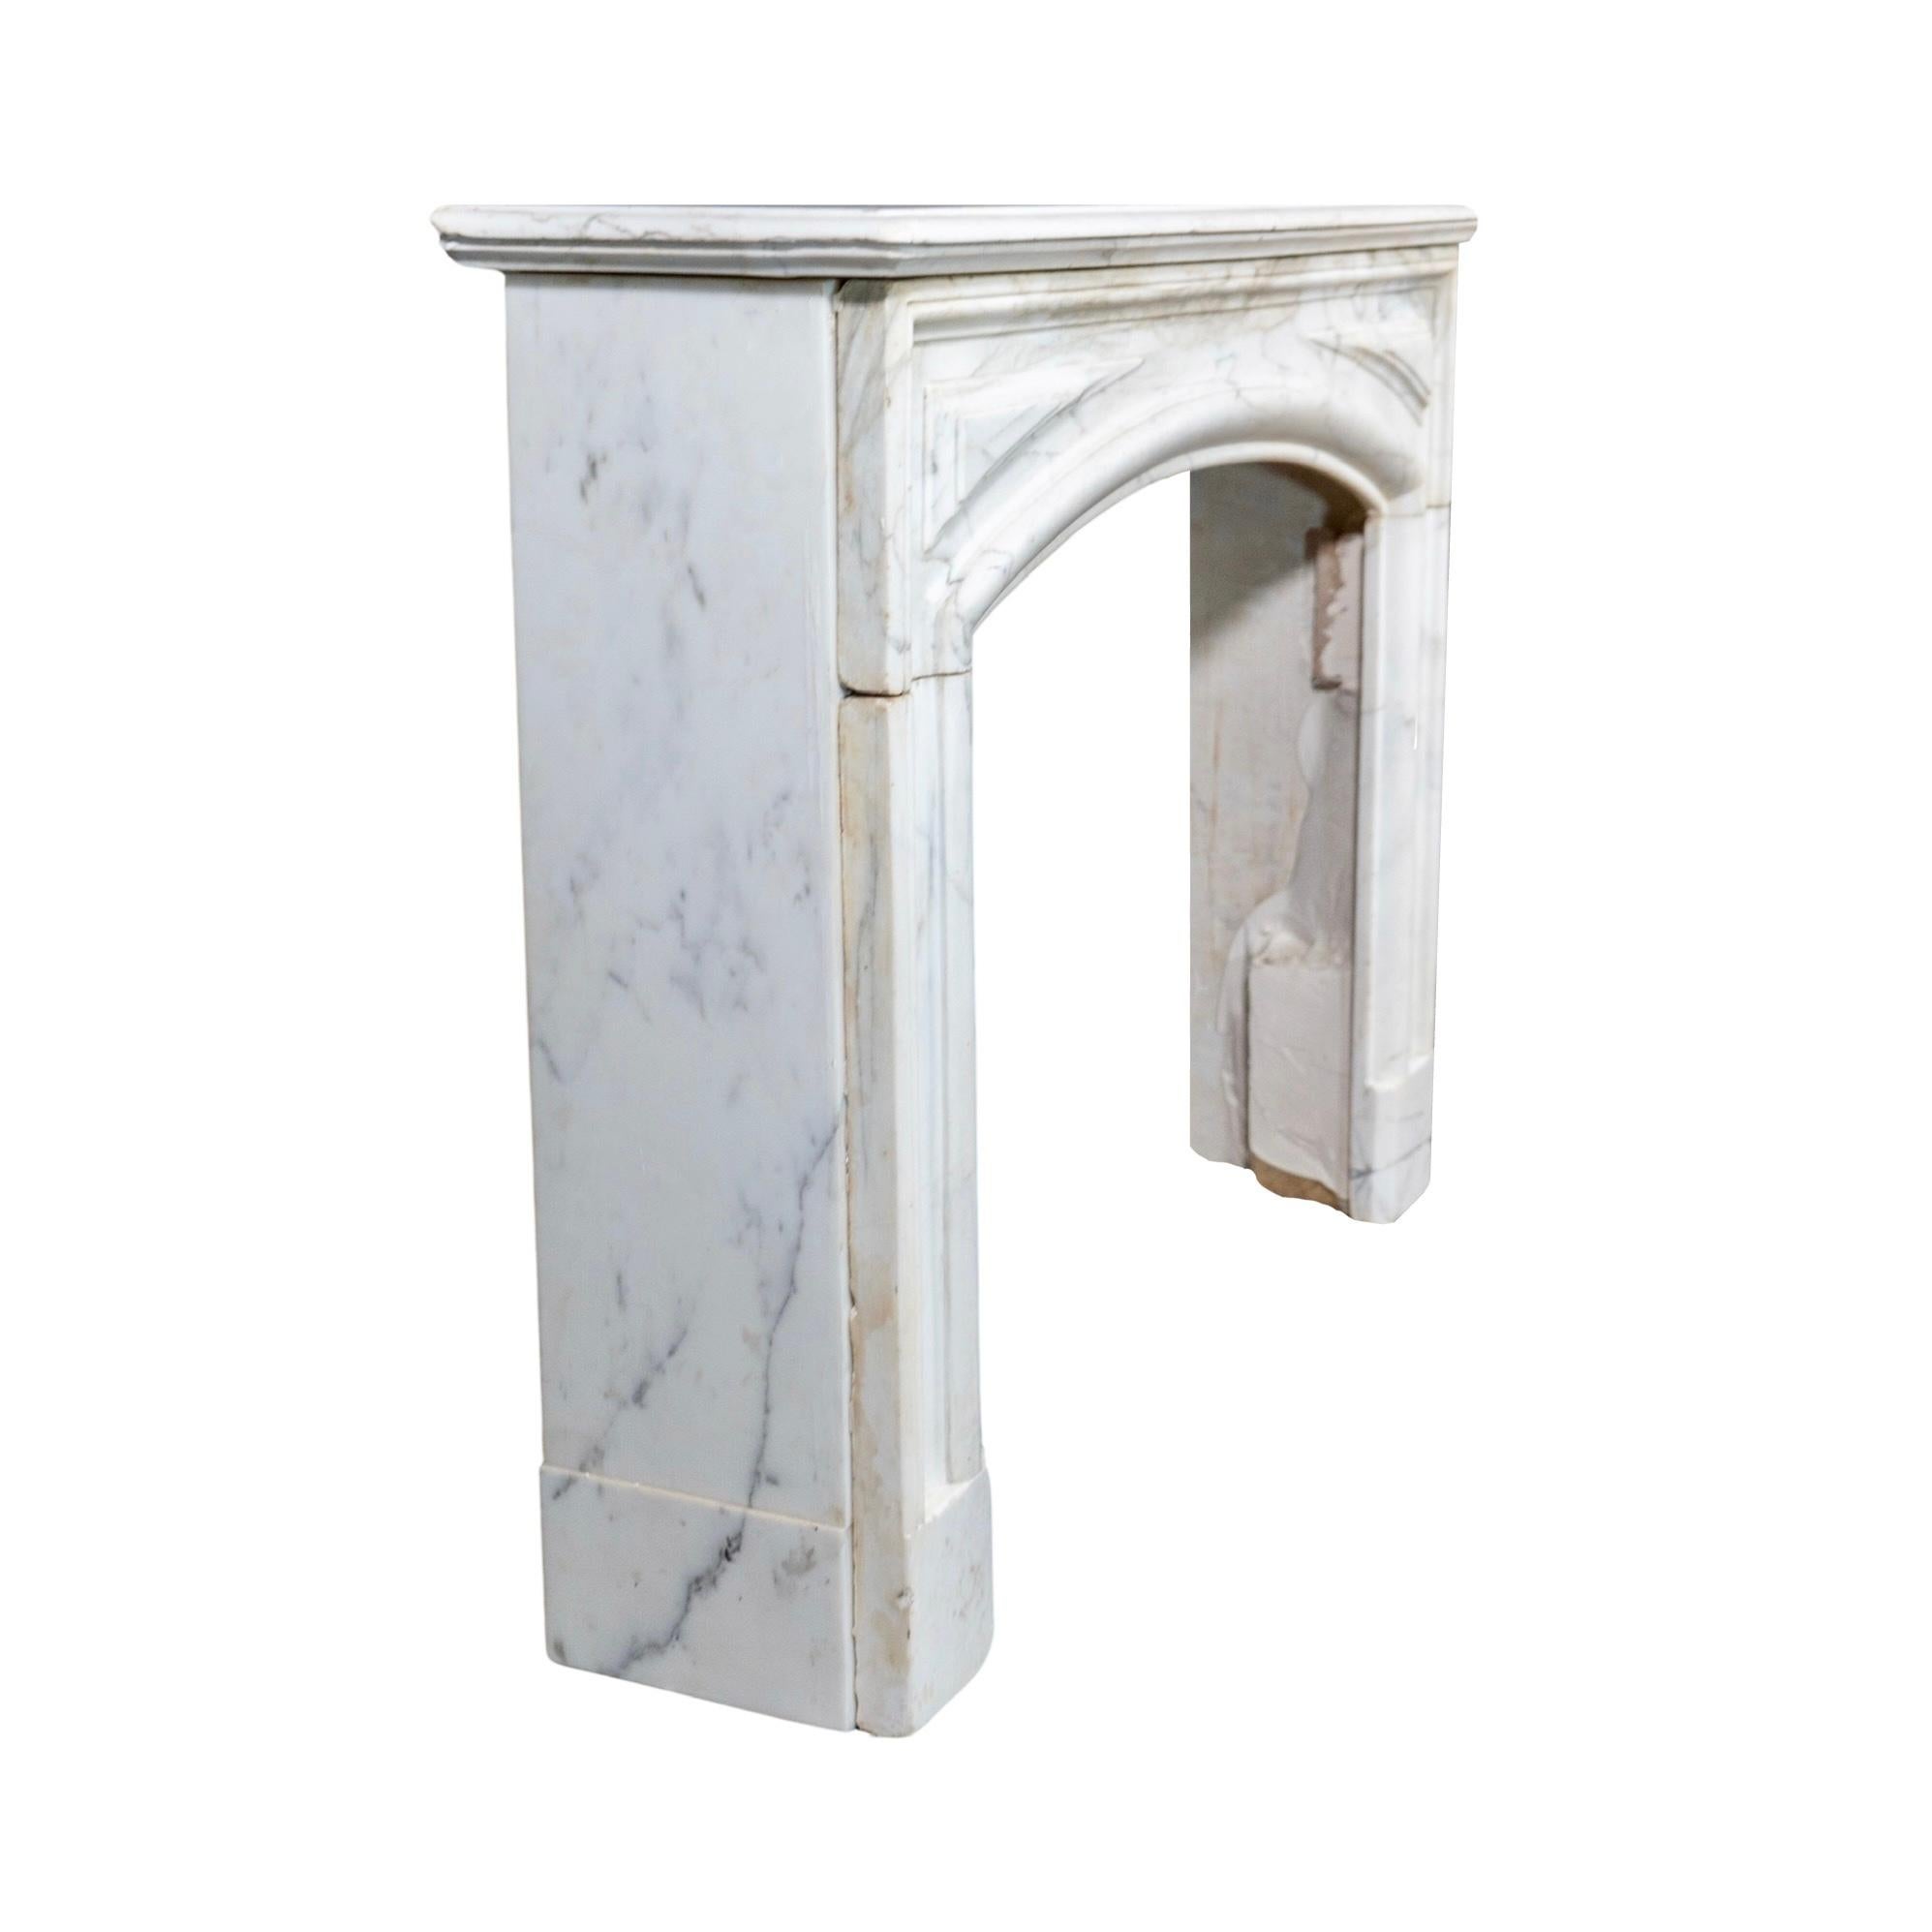 Late 19th Century French White Carrara Marble Mantel For Sale